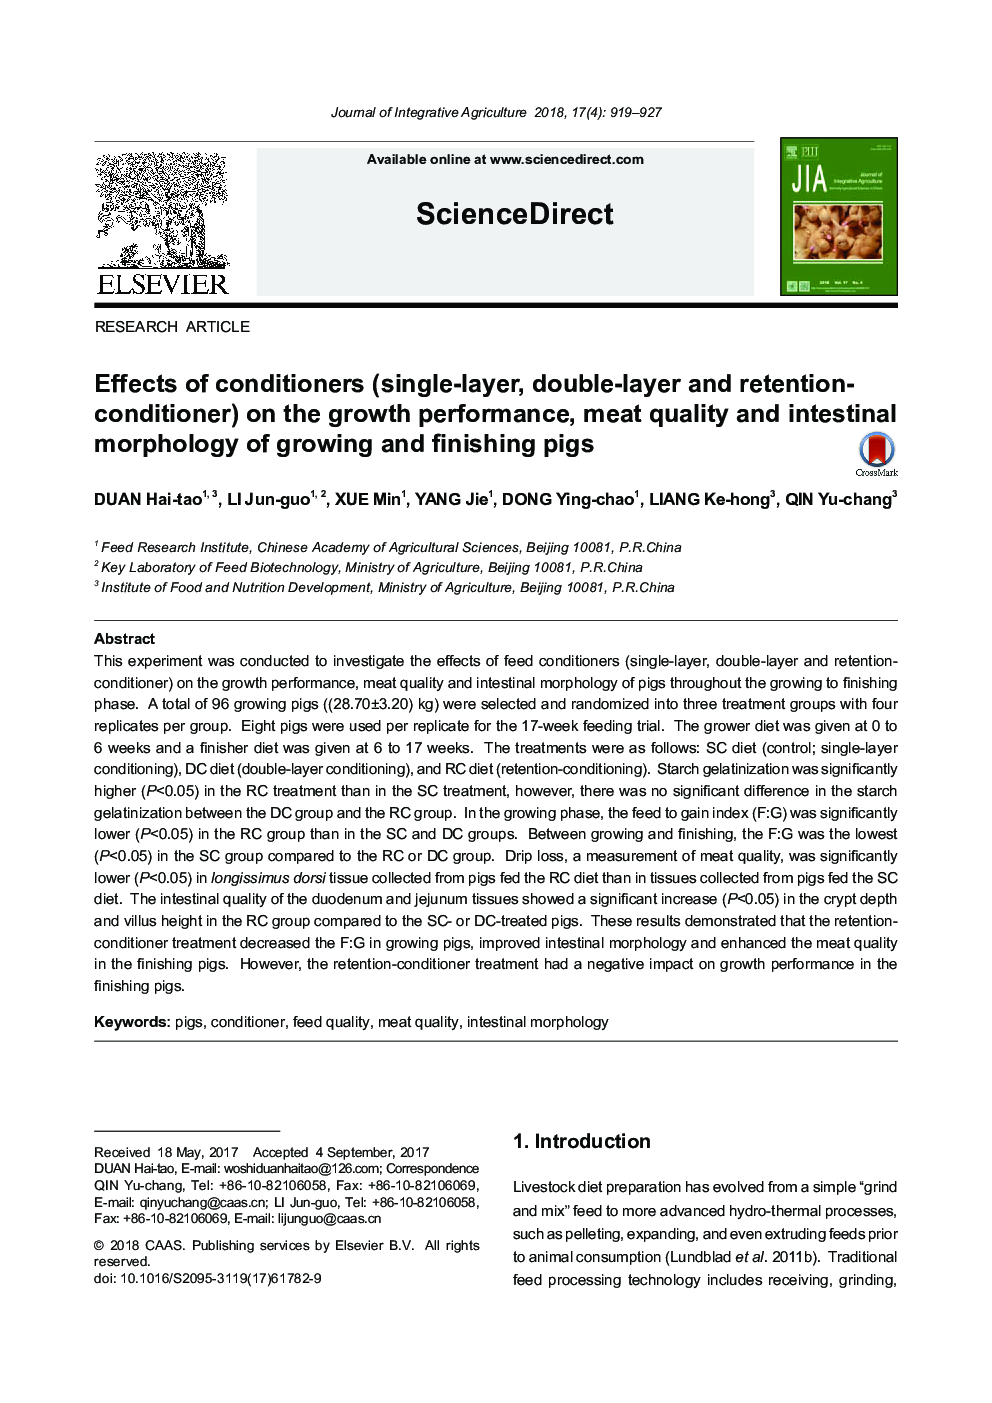 Effects of conditioners (single-layer, double-layer and retention-conditioner) on the growth performance, meat quality and intestinal morphology of growing and finishing pigs